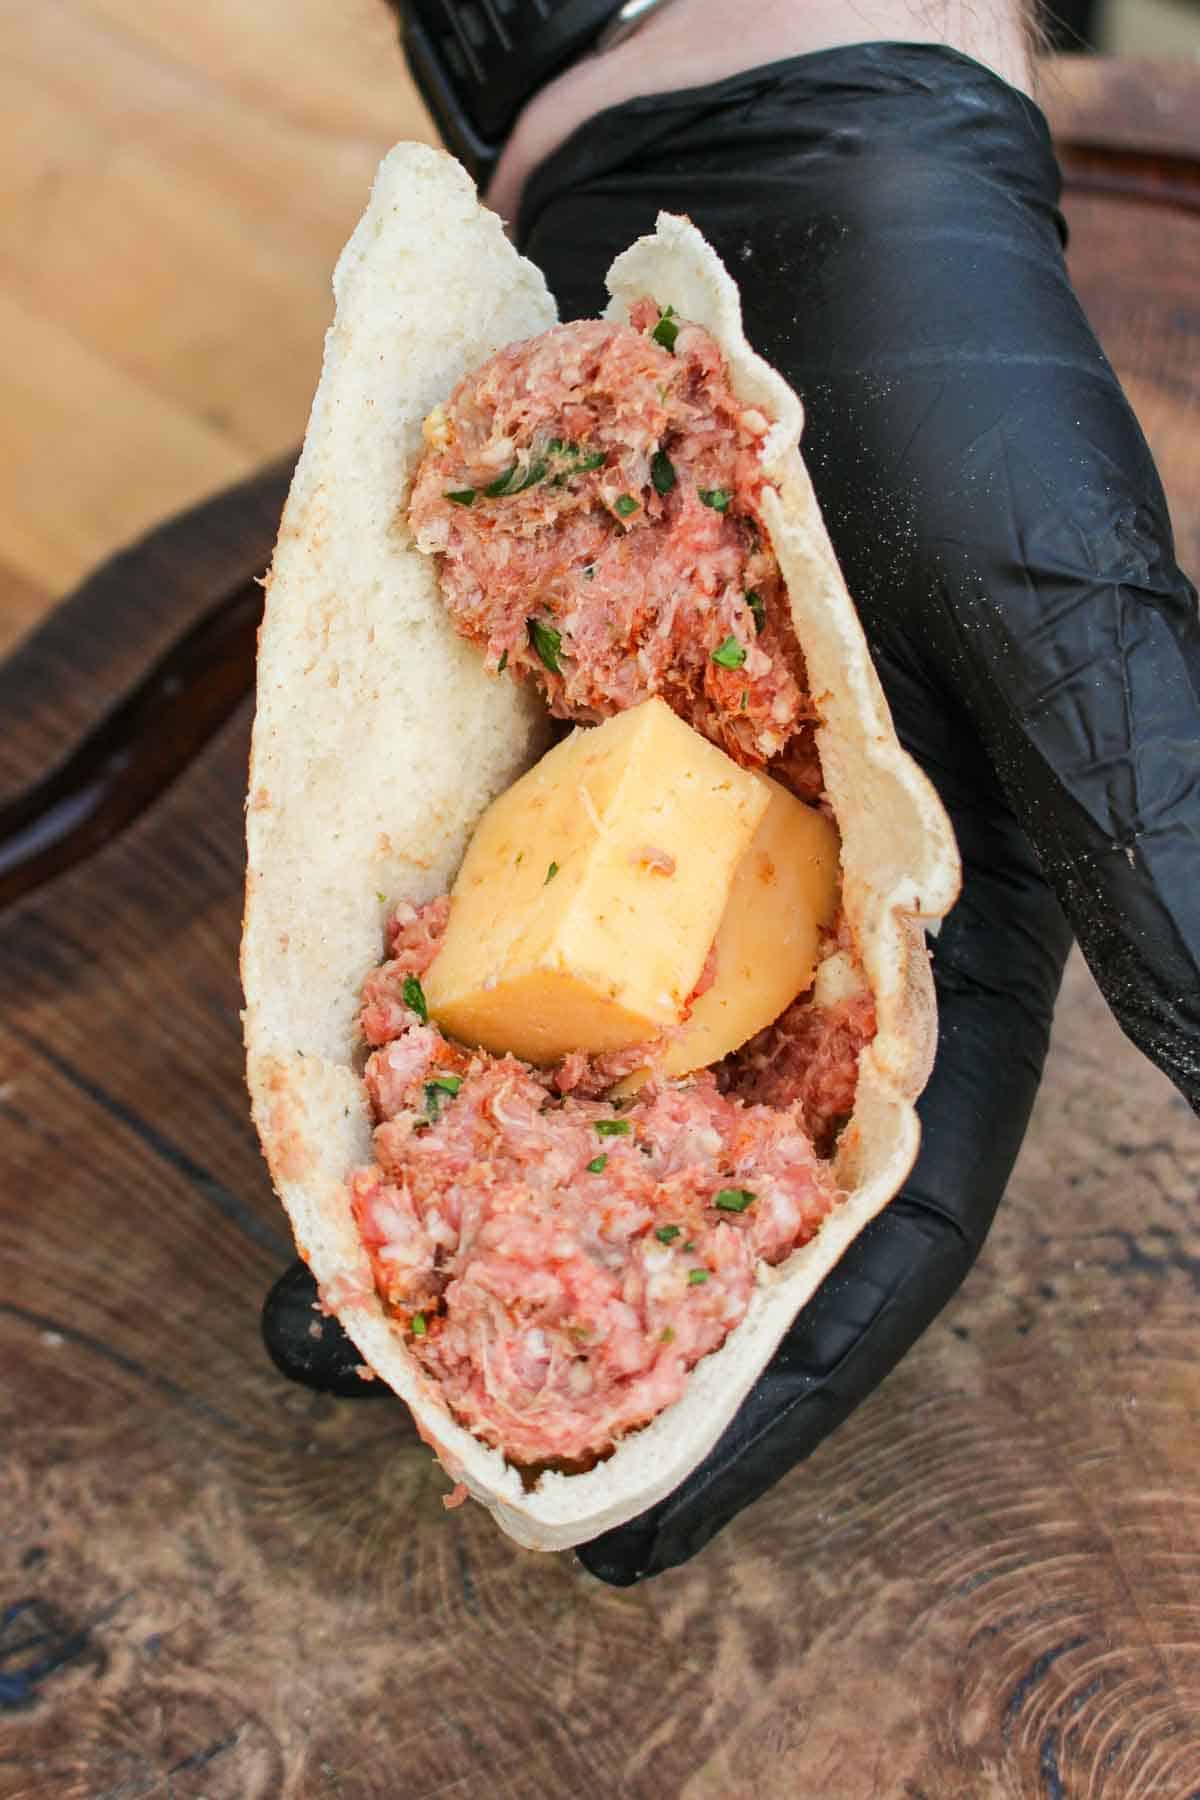 Stuffing the pita pocket with lamb and cheese.